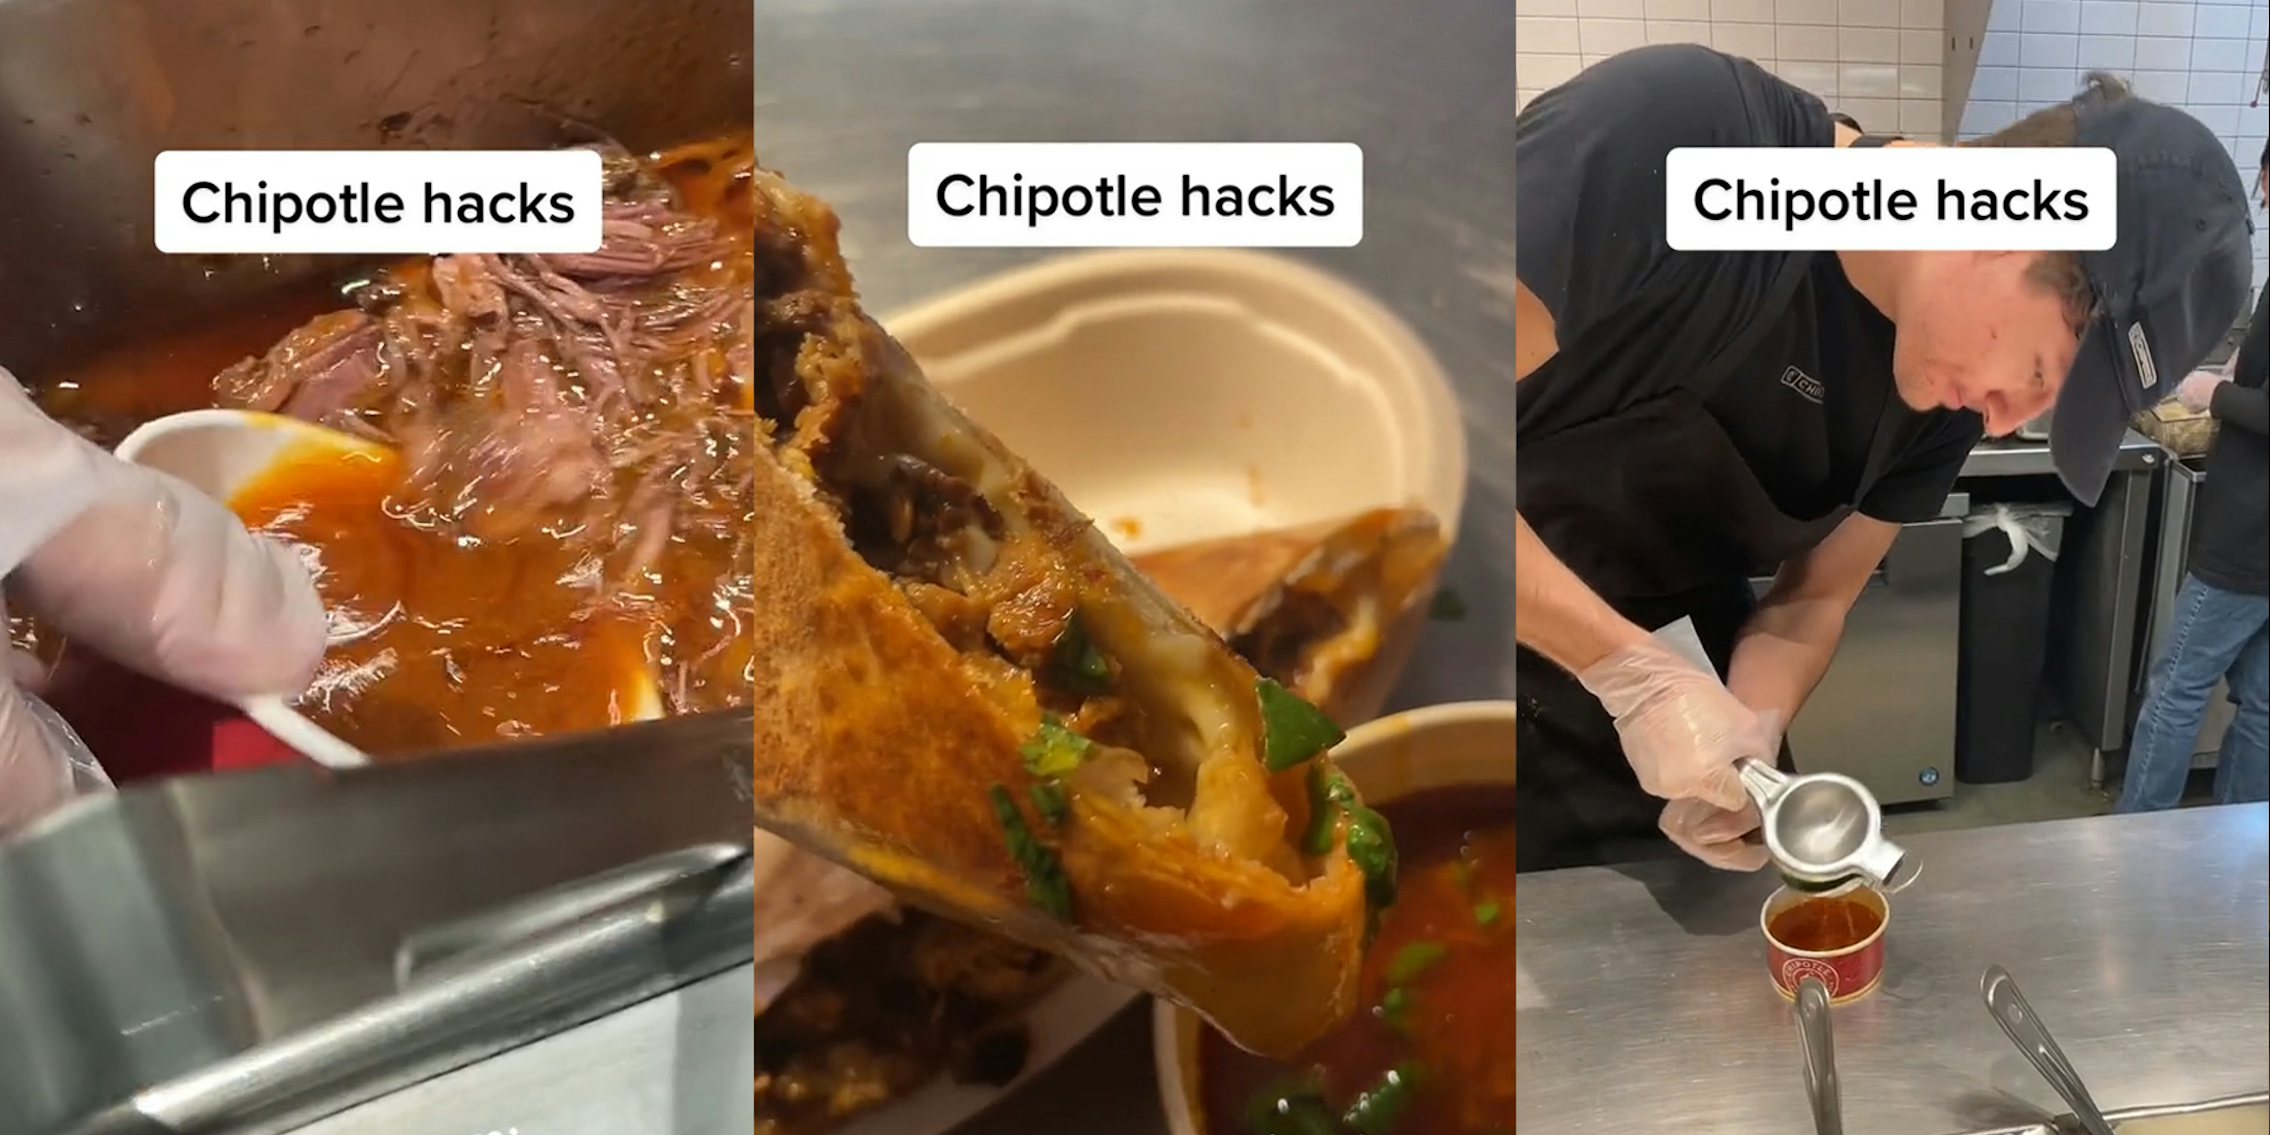 Chipotle worker using bowl to get liquid from pan with caption 'Chipotle Hacks' (l) Chipotle hack sauce on steak and chicken quesadilla with caption 'Chipotle Hacks' (c) Chipotle worker squeezing fresh lime into sauce with caption 'Chipotle Hacks' (r)